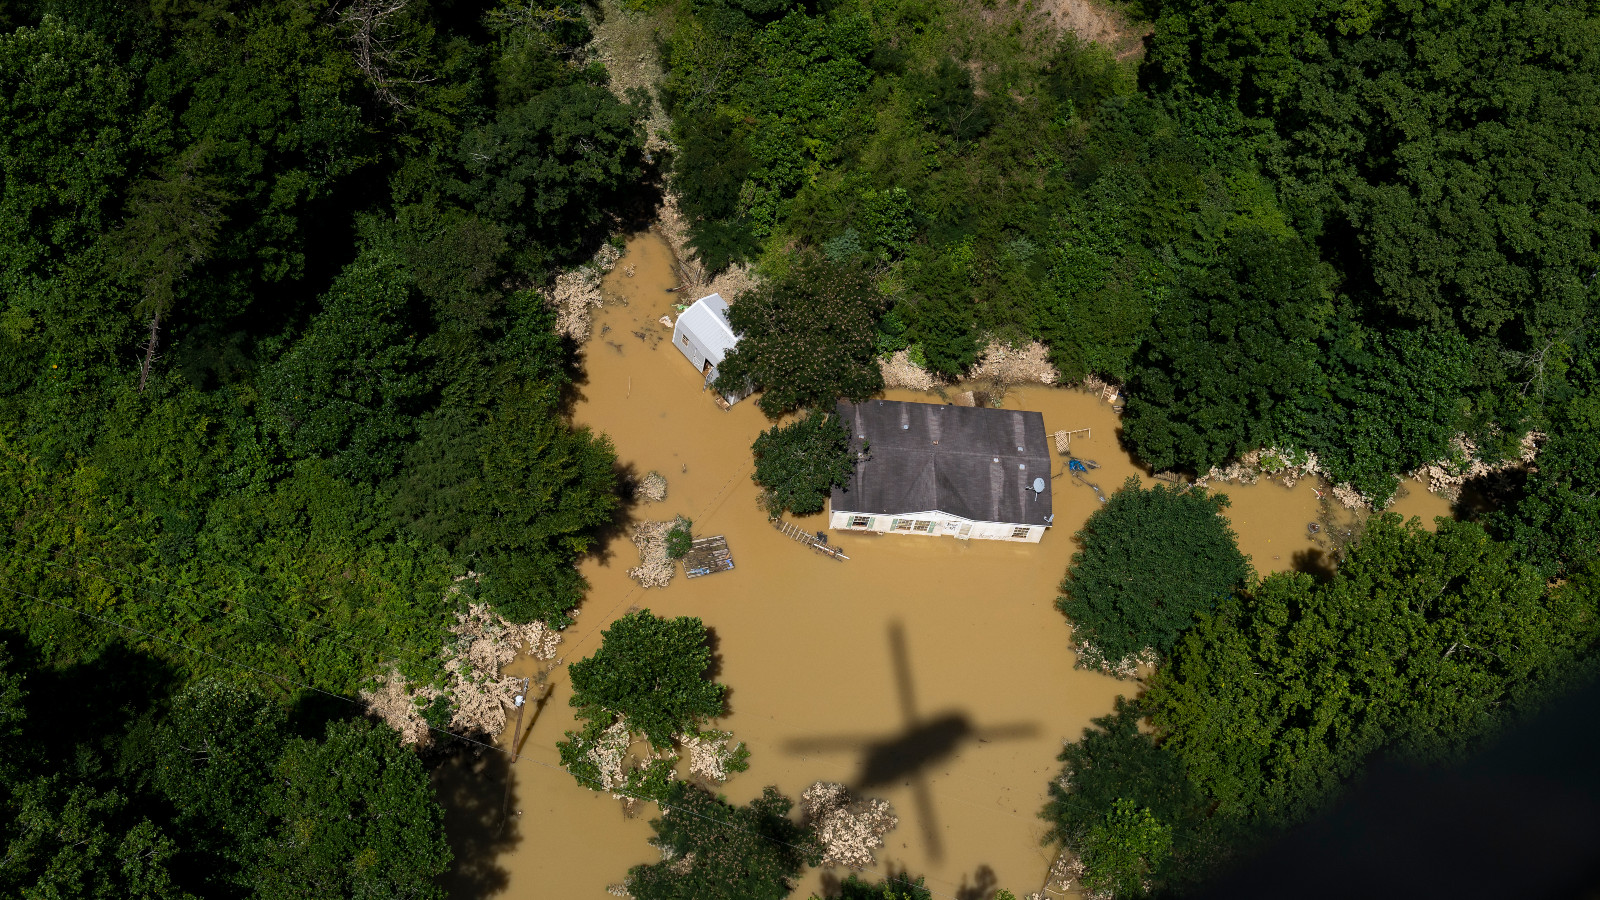 In this aerial view, floodwater surrounds a house as the Kentucky National Guard fly a recon and rescue mission on July 30, 2022 in Breathitt County near Jackson, Kentucky. Flood waters have receded but still surround much of the area. At least 25 people have been killed in the state, with hundreds rescued, but many still unaccounted for amid flooding after heavy rainfall.